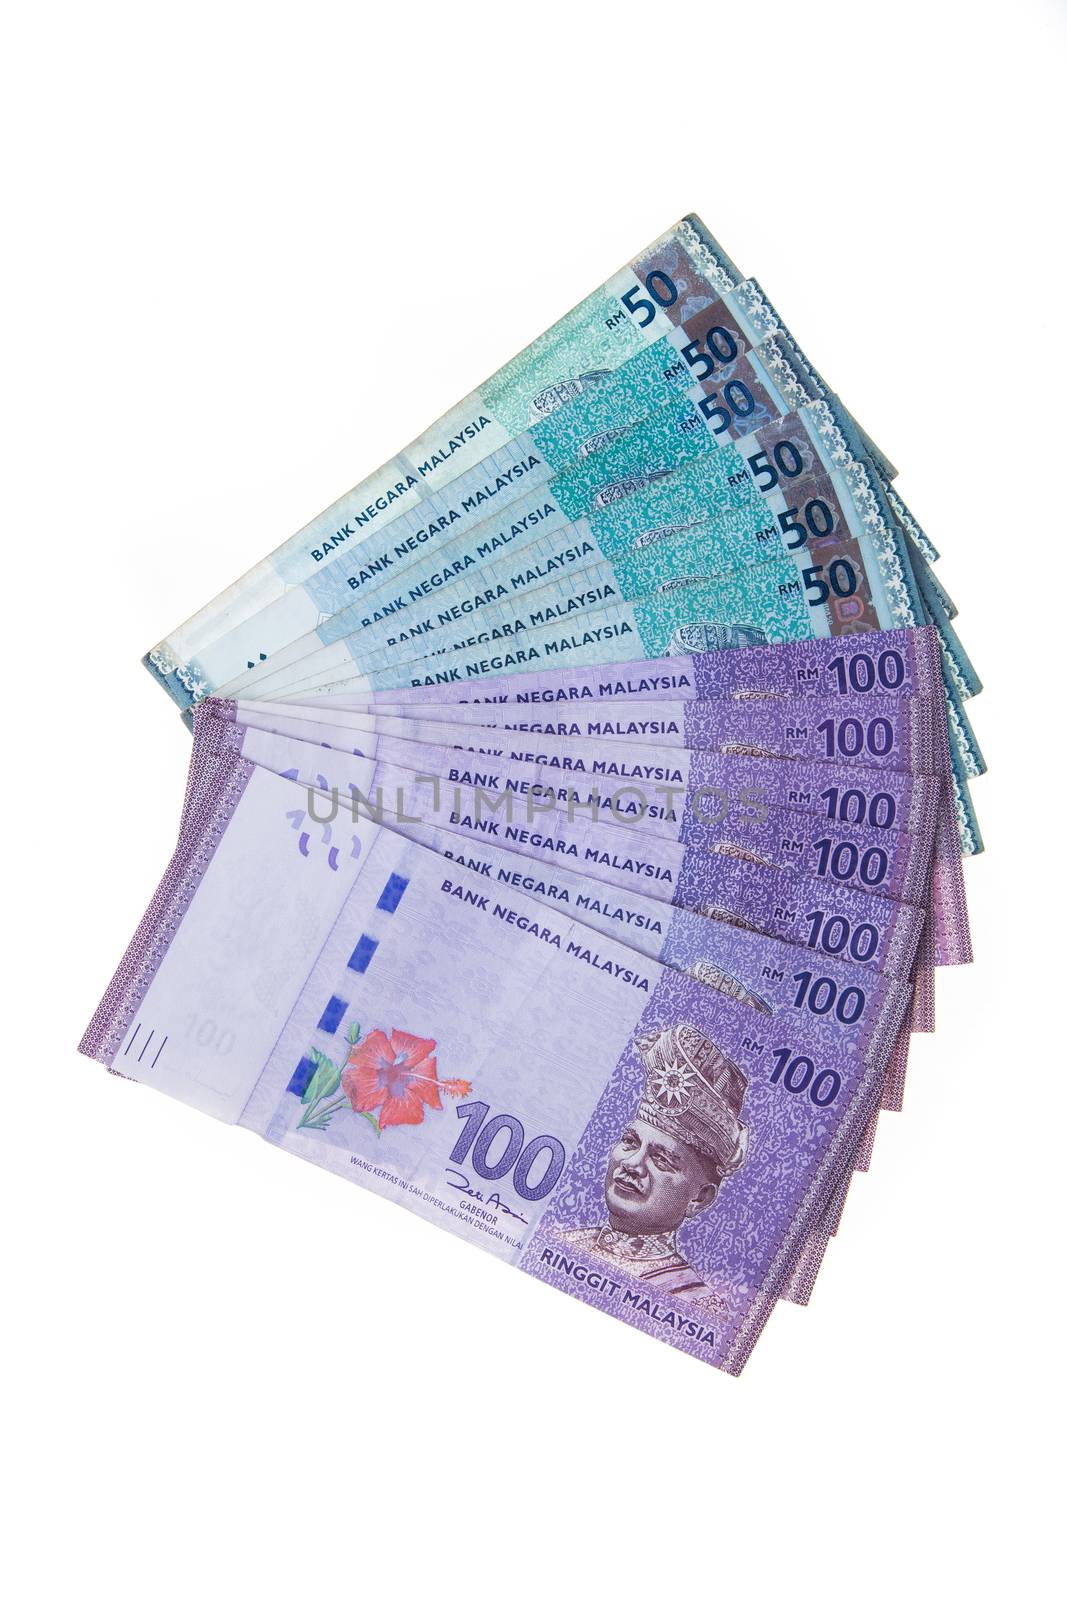 Malaysian currency on white backgorund